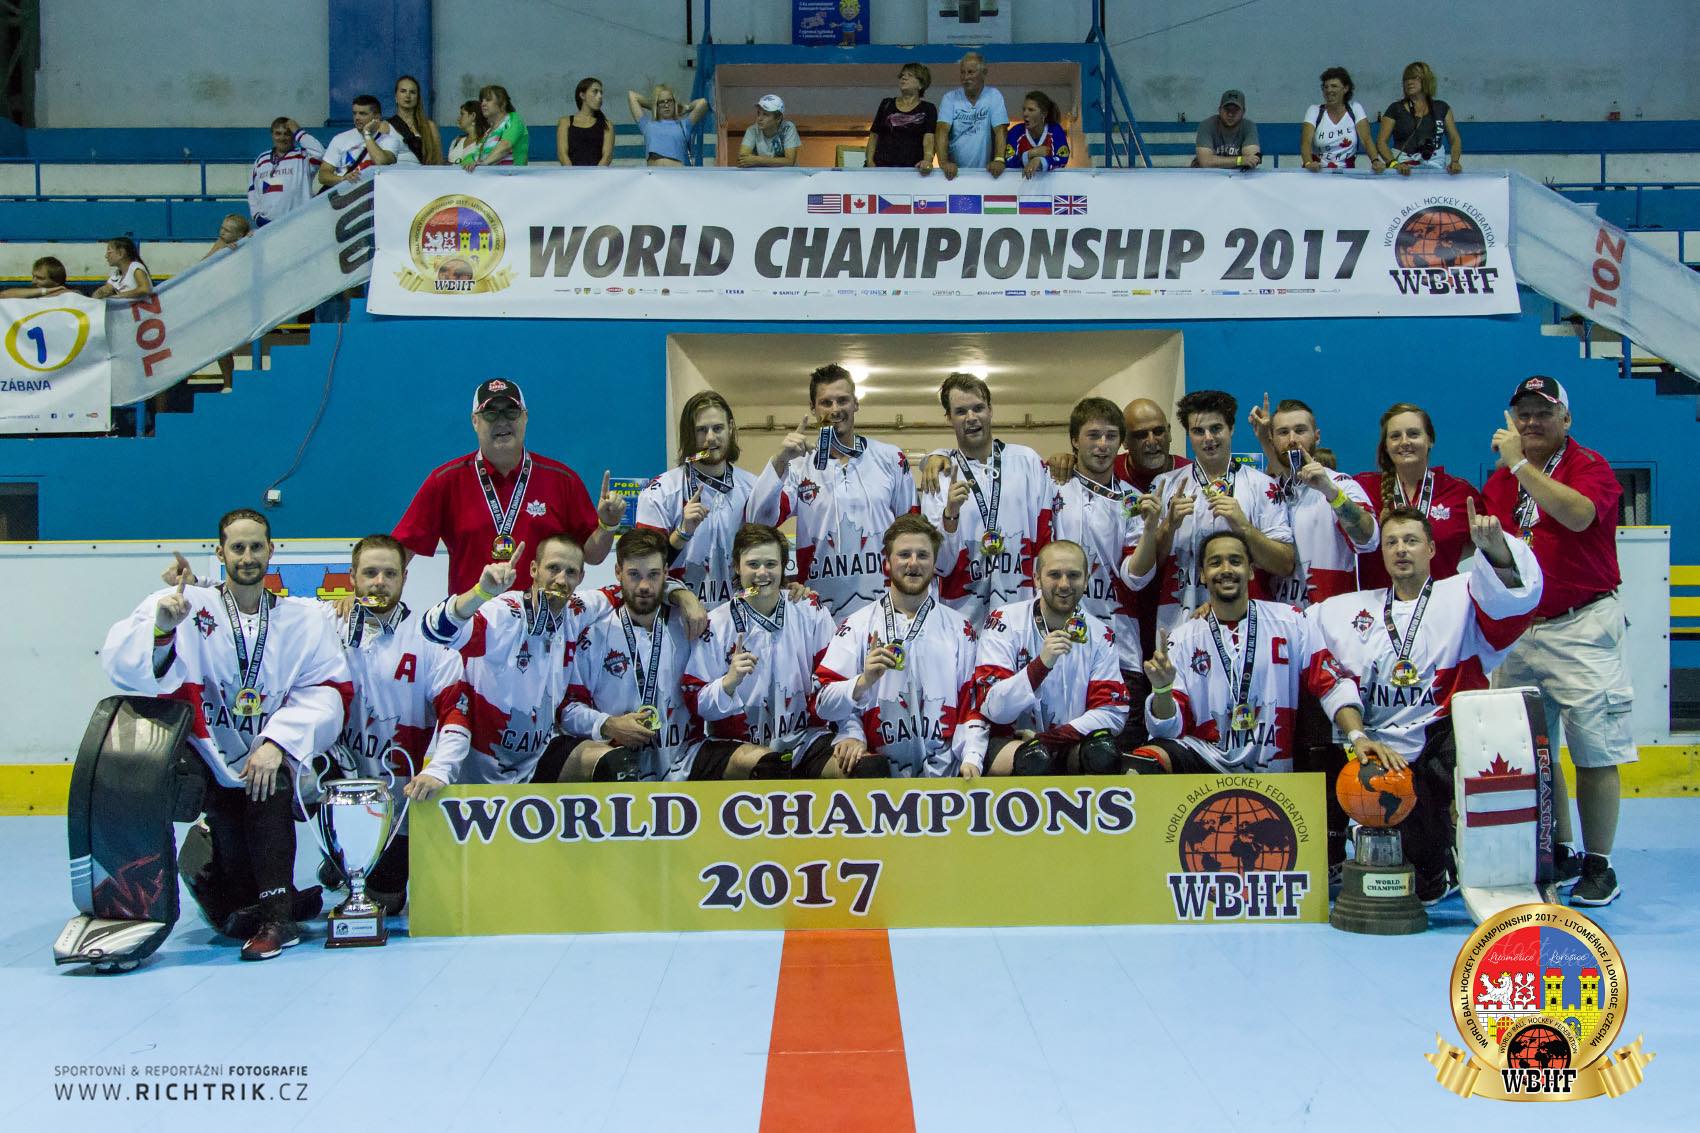 Mauro Cugini:&quot;To all the boys and staff on Men's Team Canada, what a group!&quot; | WBDHF